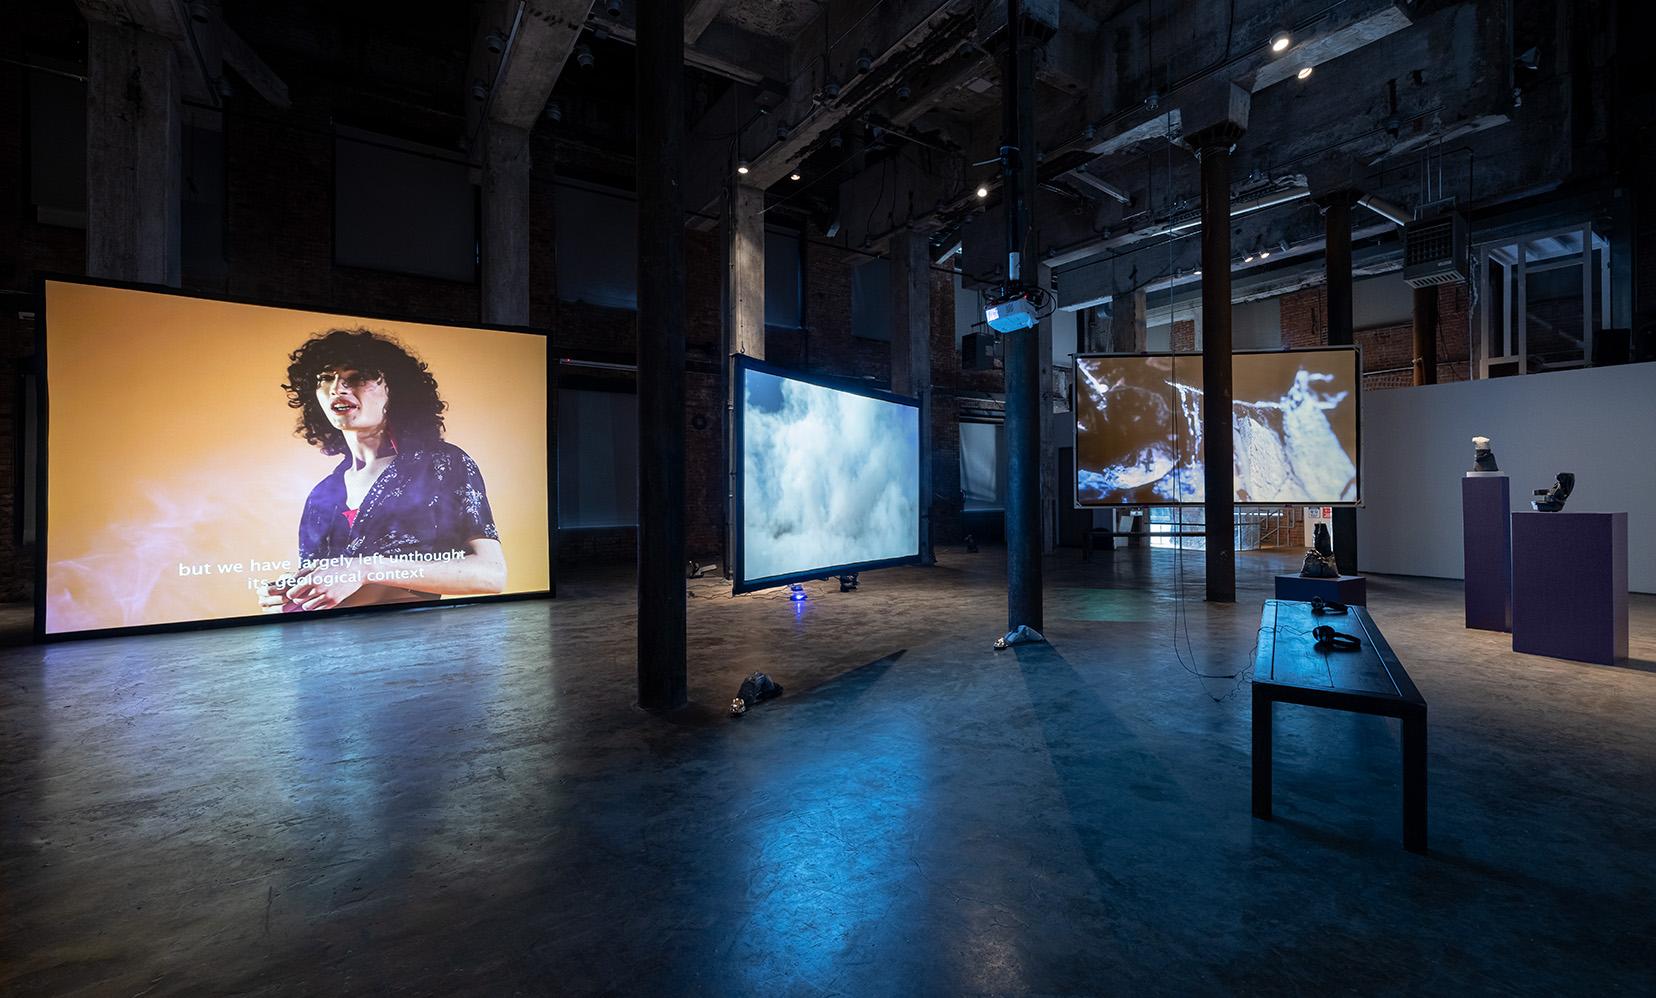 Wide gallery view, main view is a screen projecting someone with pale skin, black curly hair, and a purple shirt. Another screen shows white clouds, interspersed are various art items. 